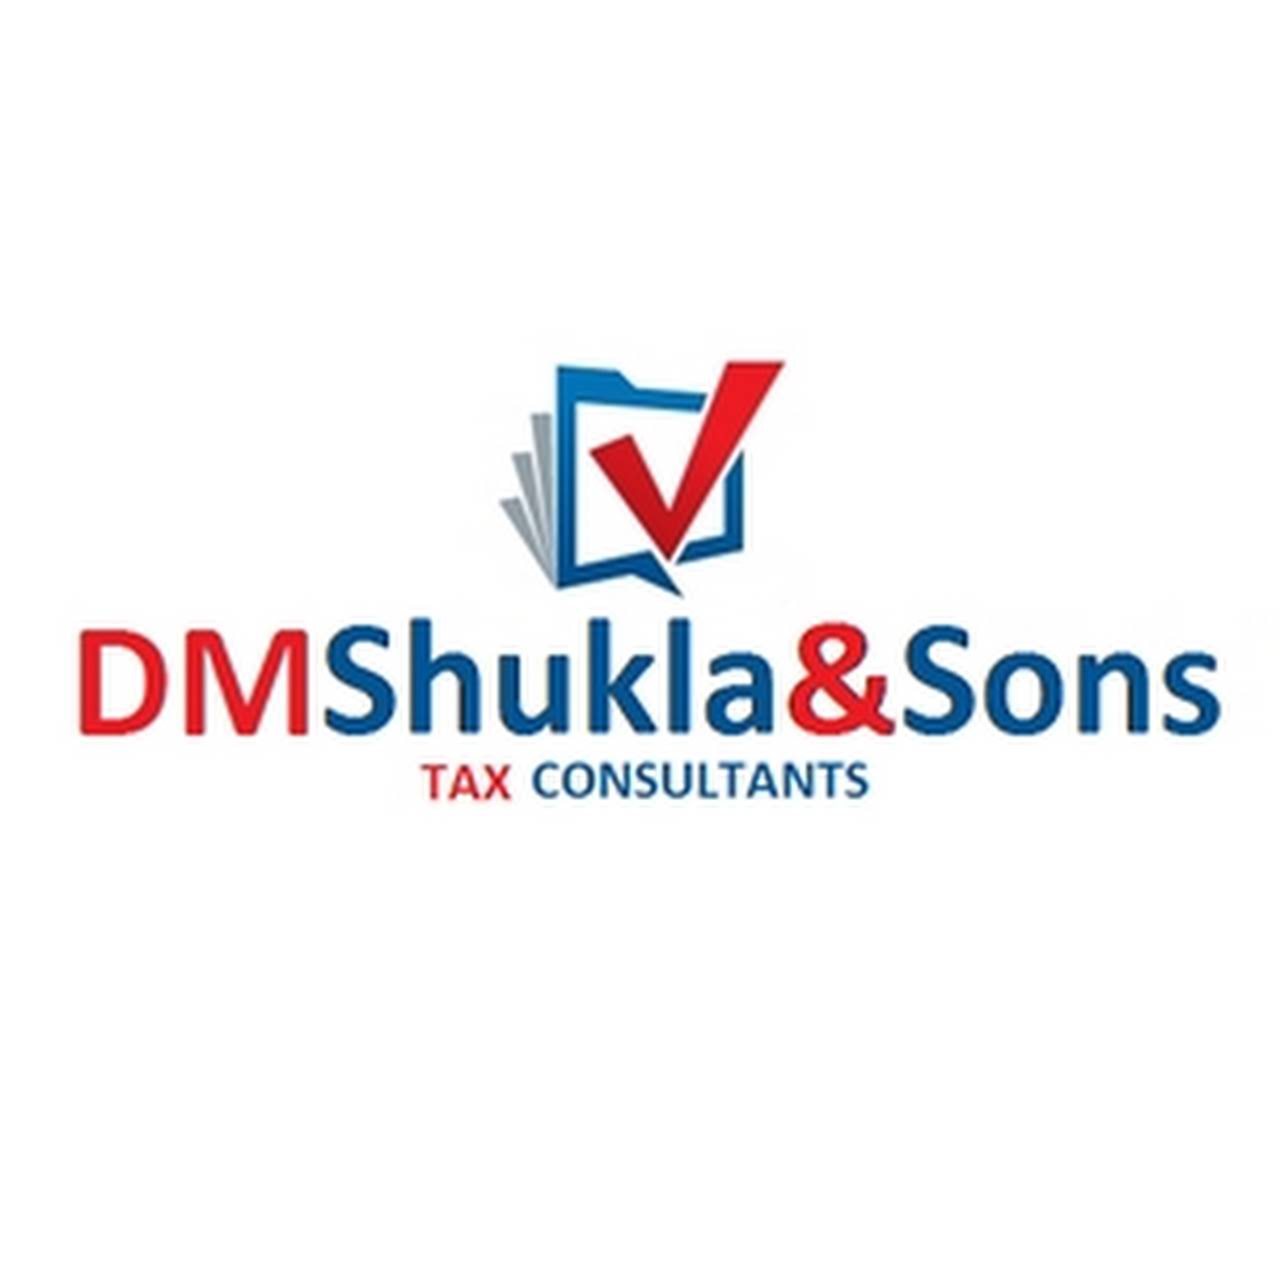 D.M. Shukla & Sons Tax Consultants|Accounting Services|Professional Services